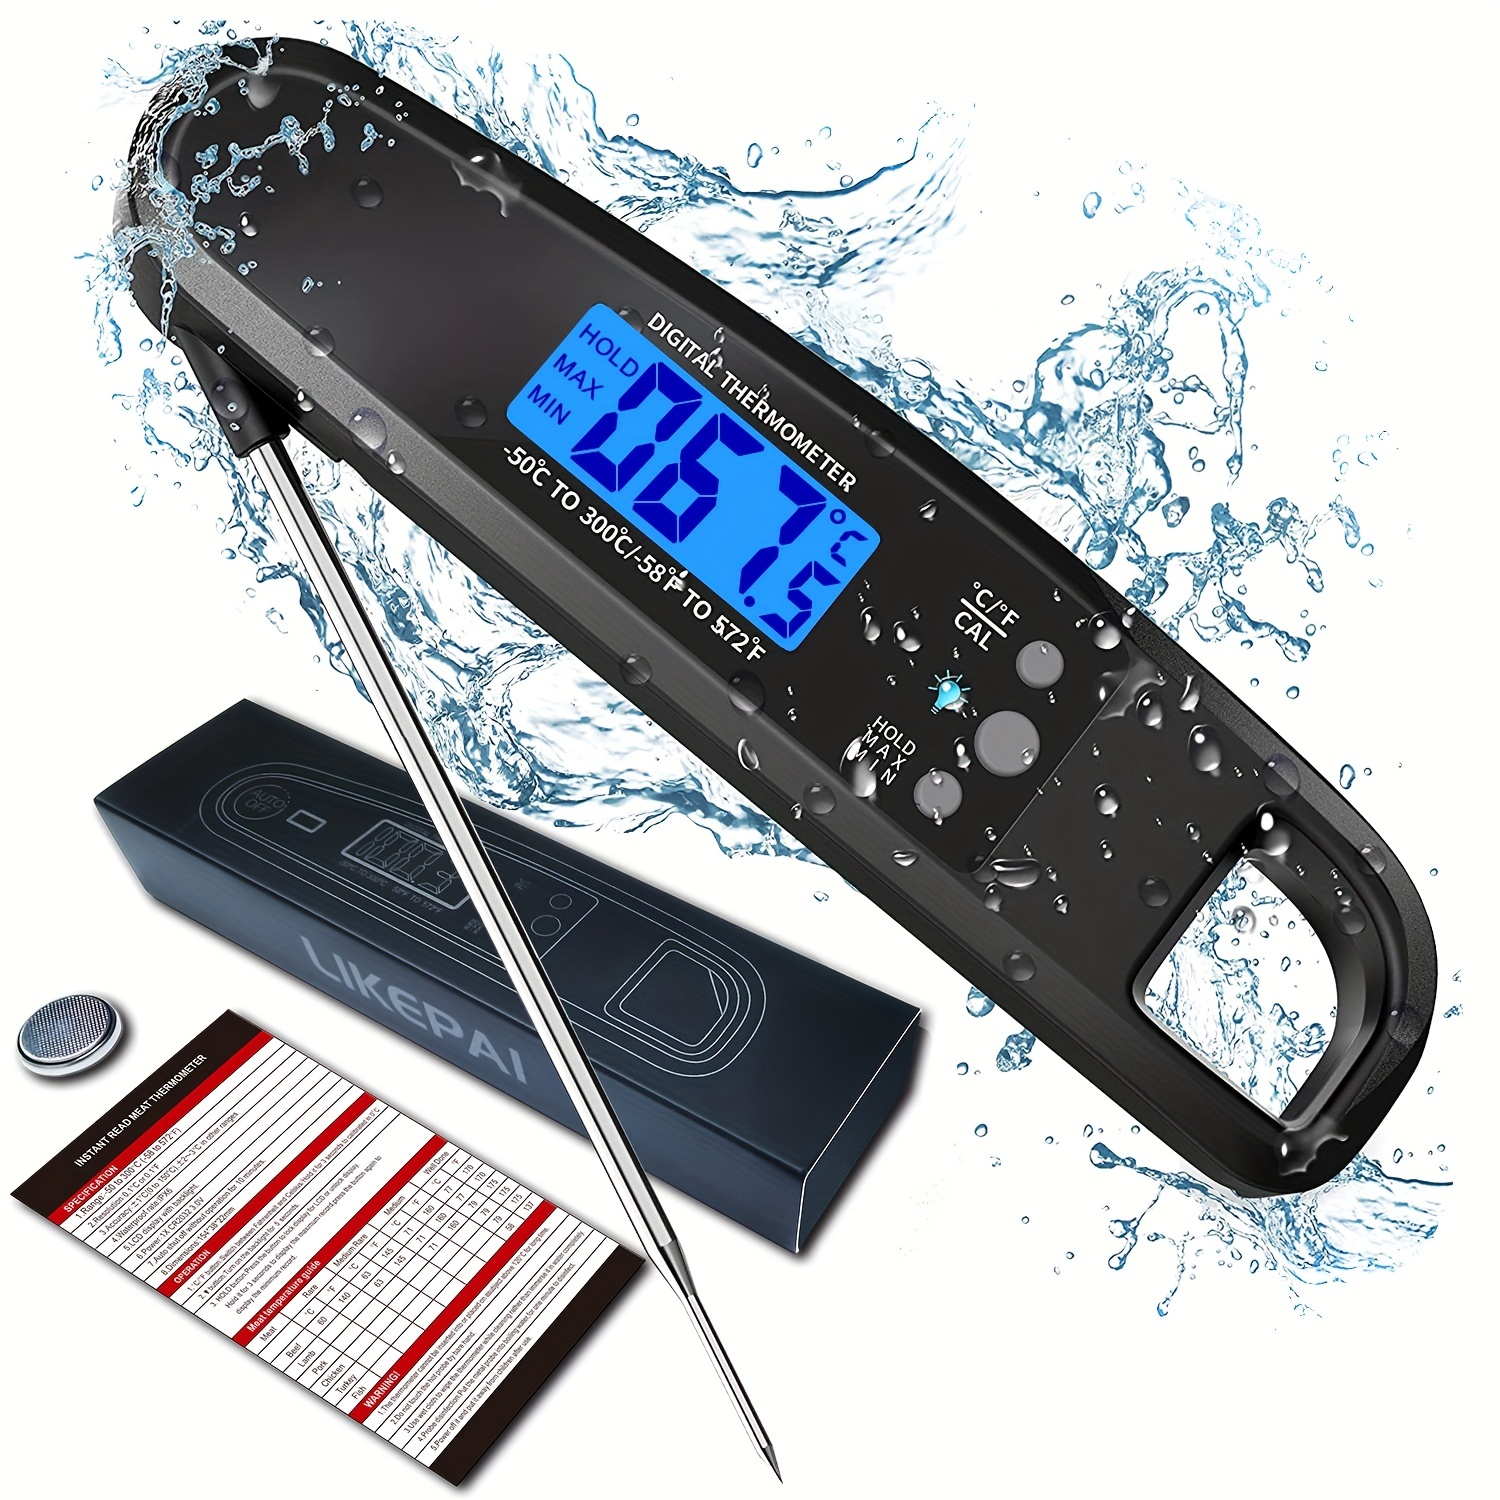 1pc Waterproof Digital Instant Read Meat Thermometer With 4.6Folding Probe  Backlight & Calibration Function For Cooking, Thermometer Digital Thermome